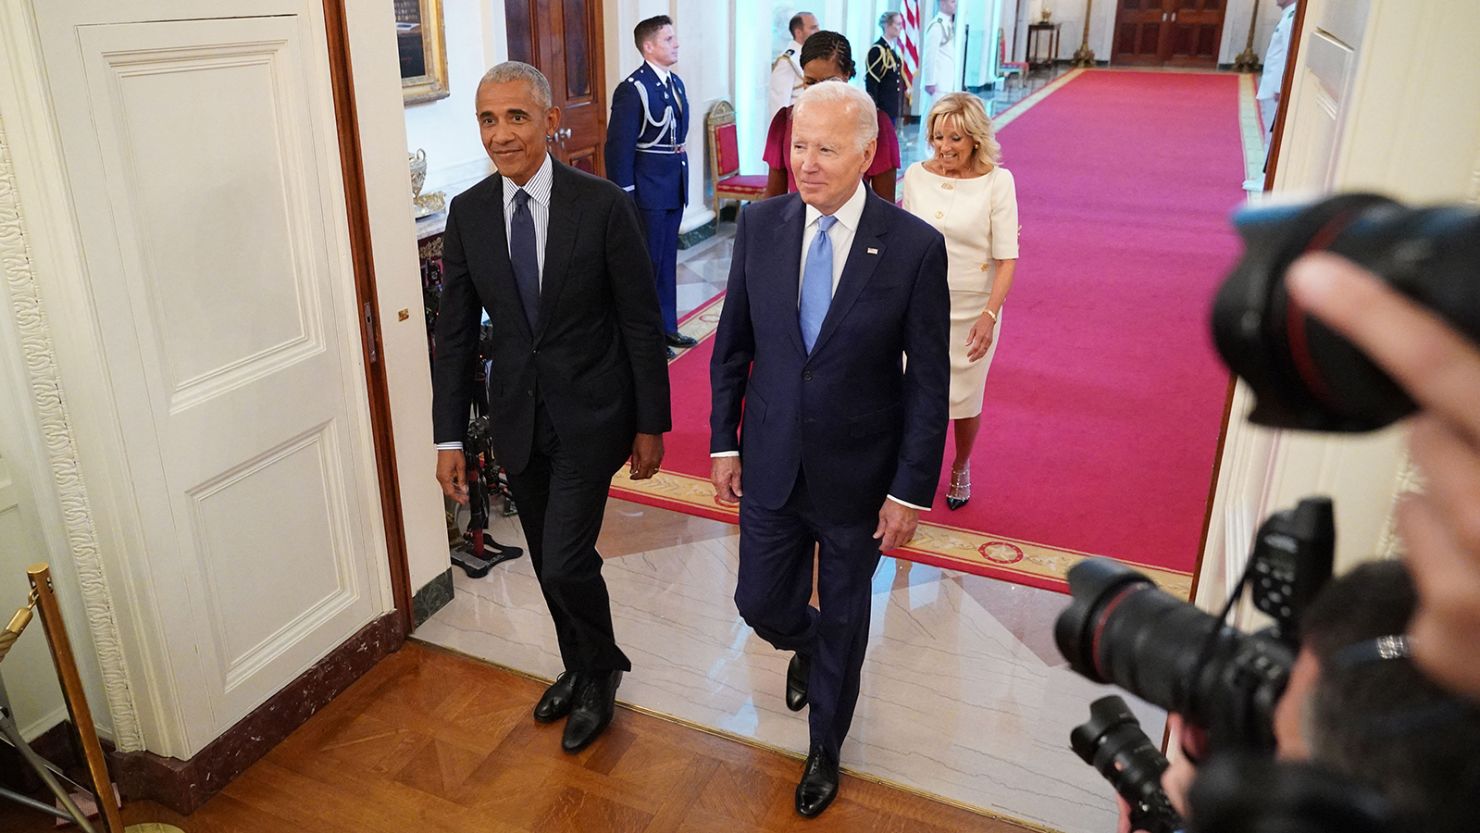 US President Joe Biden and first lady Jill Biden along with former President Barack Obama and former first lady Michelle Obama arrive in the East Room of the White House in Washington, DC, on September 7, 2022.